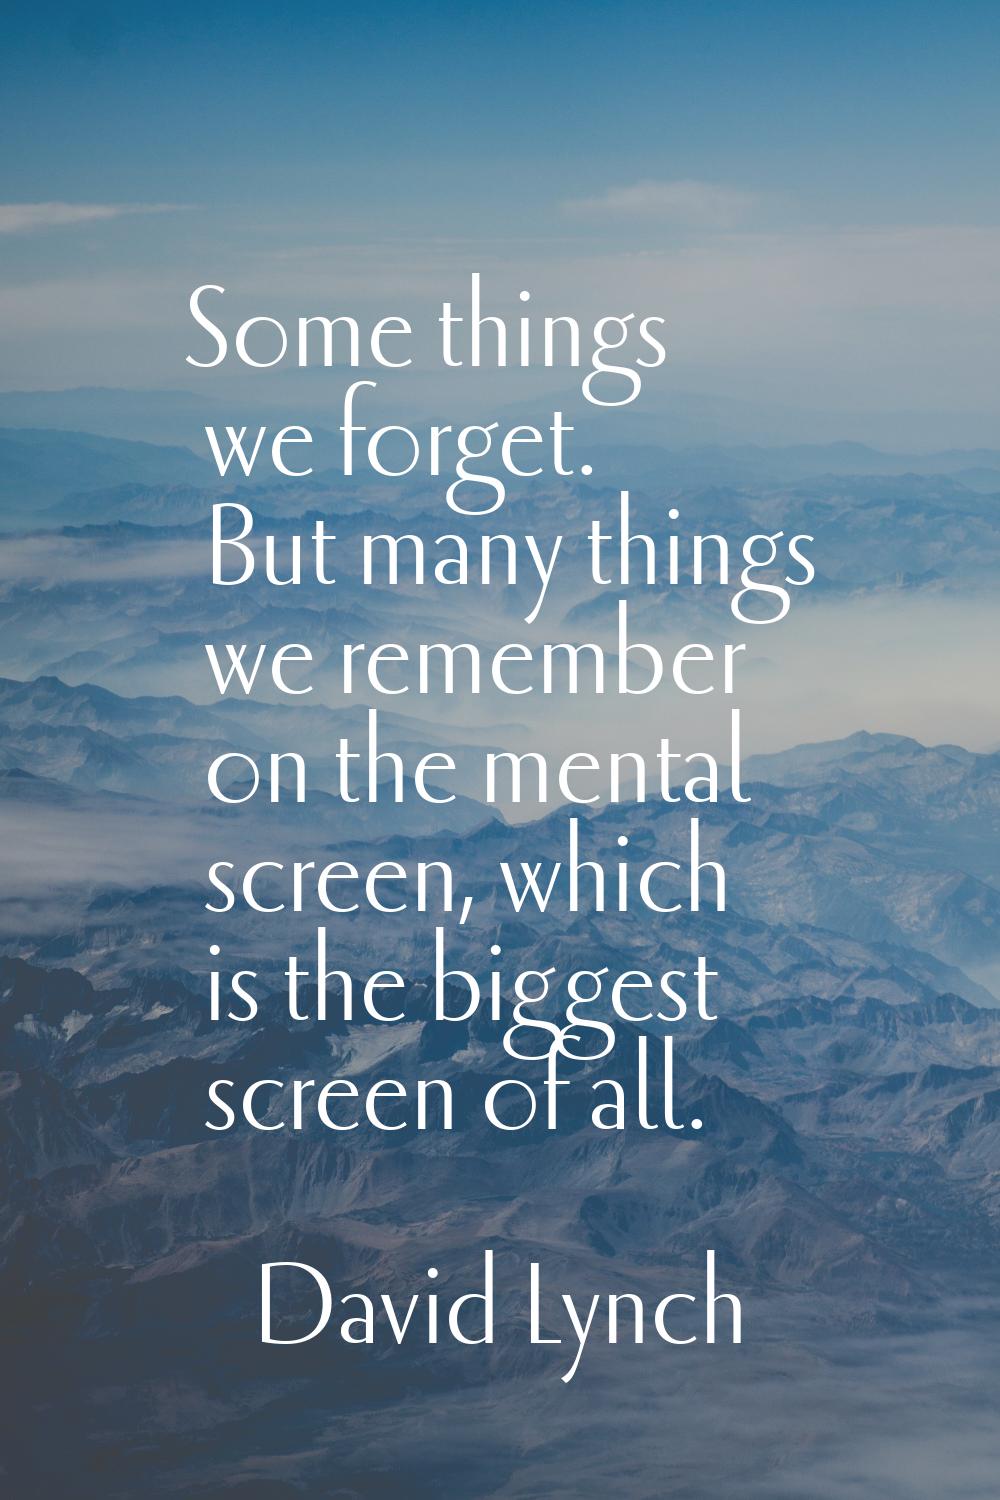 Some things we forget. But many things we remember on the mental screen, which is the biggest scree